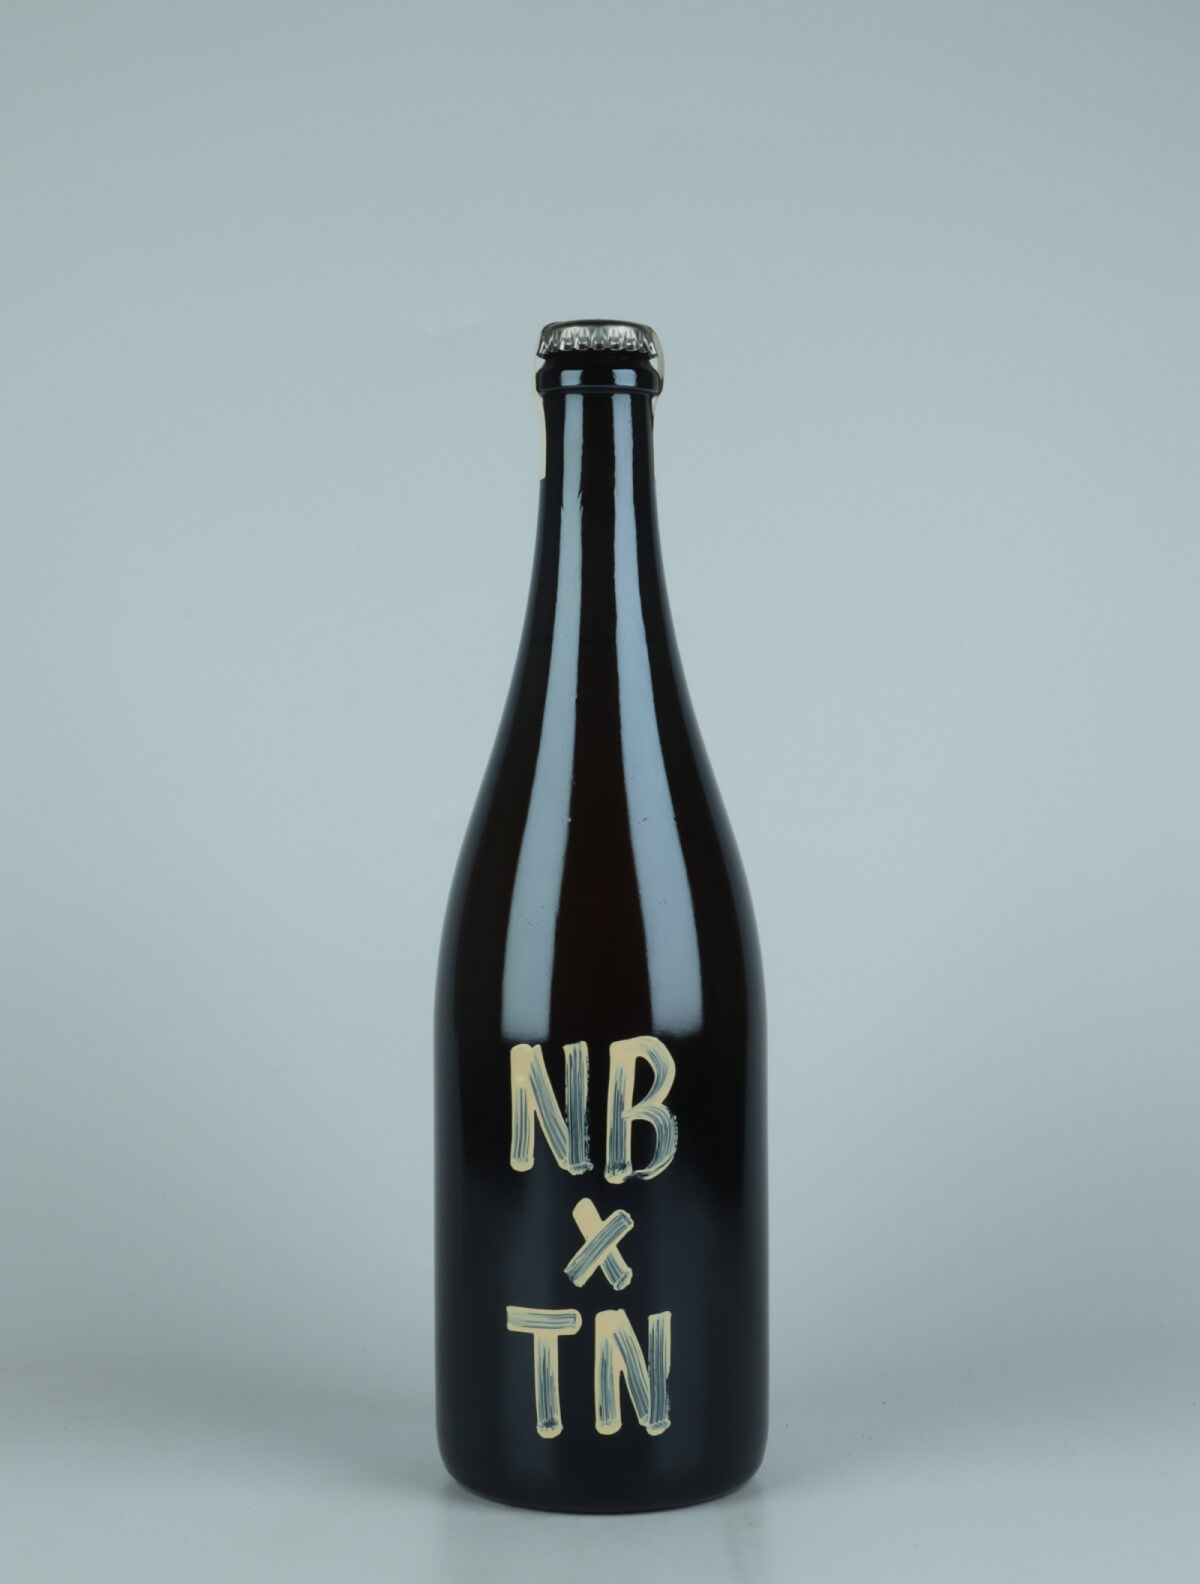 A bottle 2022 NB x TN Sparkling from Tanca Nica, Sicily in Italy